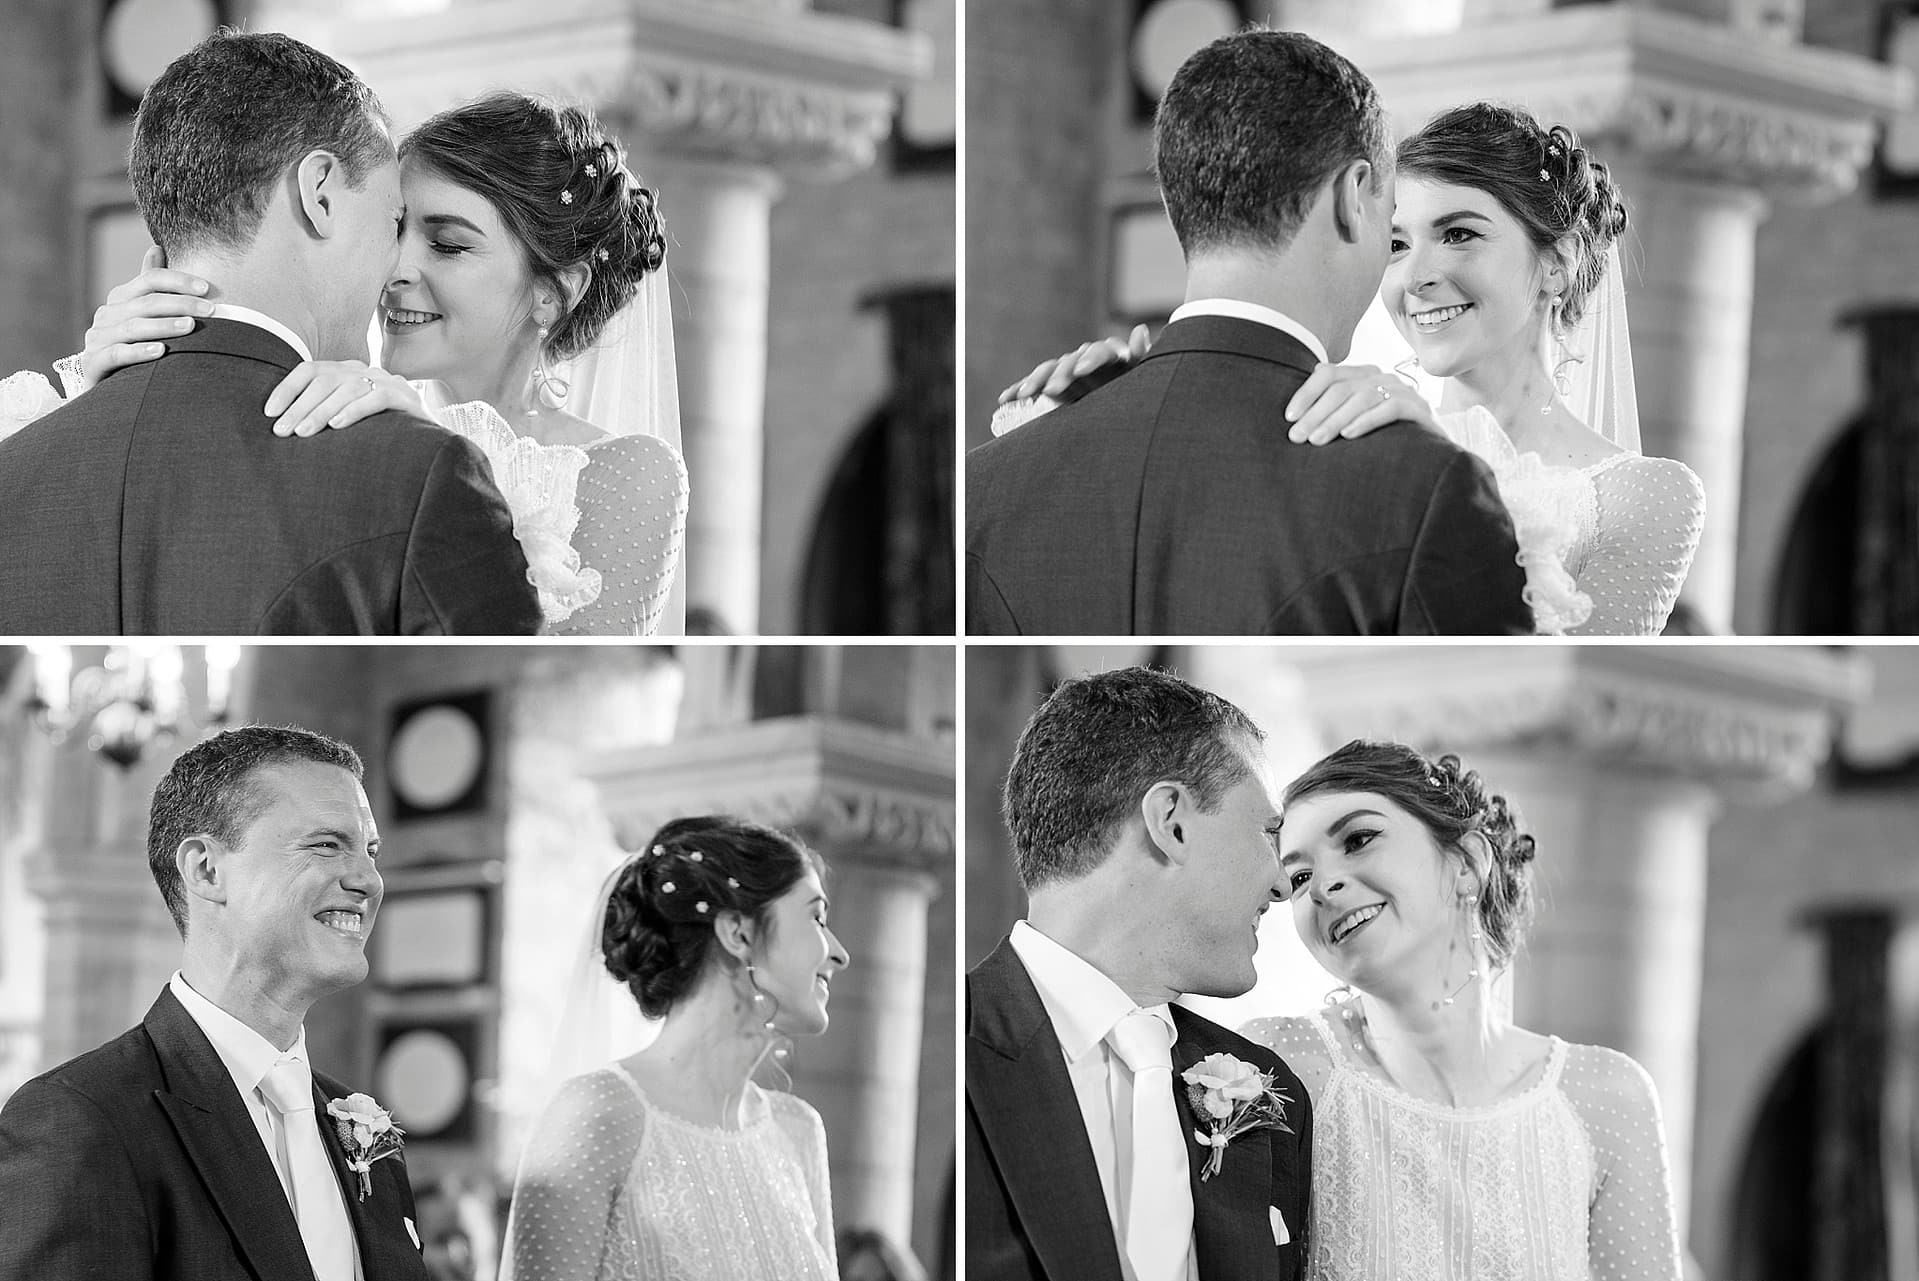 Close up pictures of the bride and groom's facial reactions as they're pronounced husband and wife